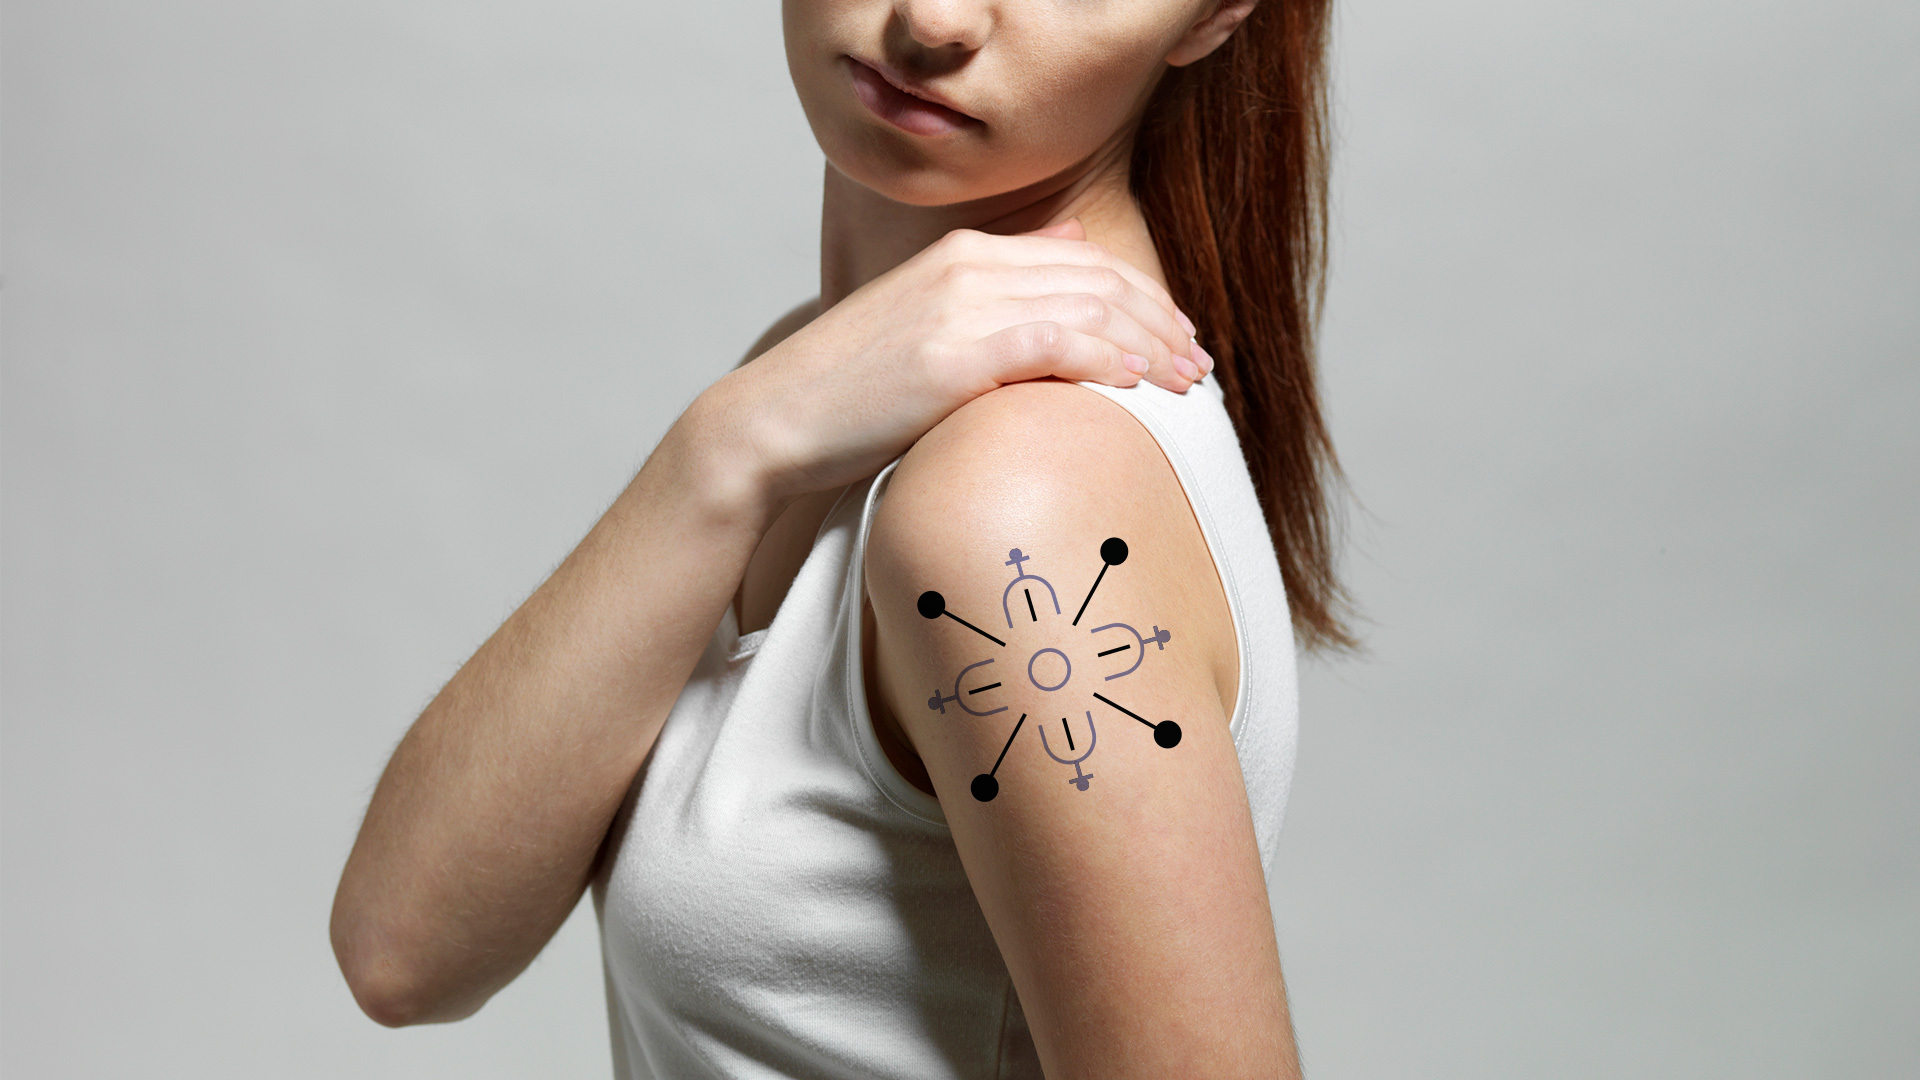 Ink positive how tattoos can heal the mind as well as adorn the body   Psychology  The Guardian